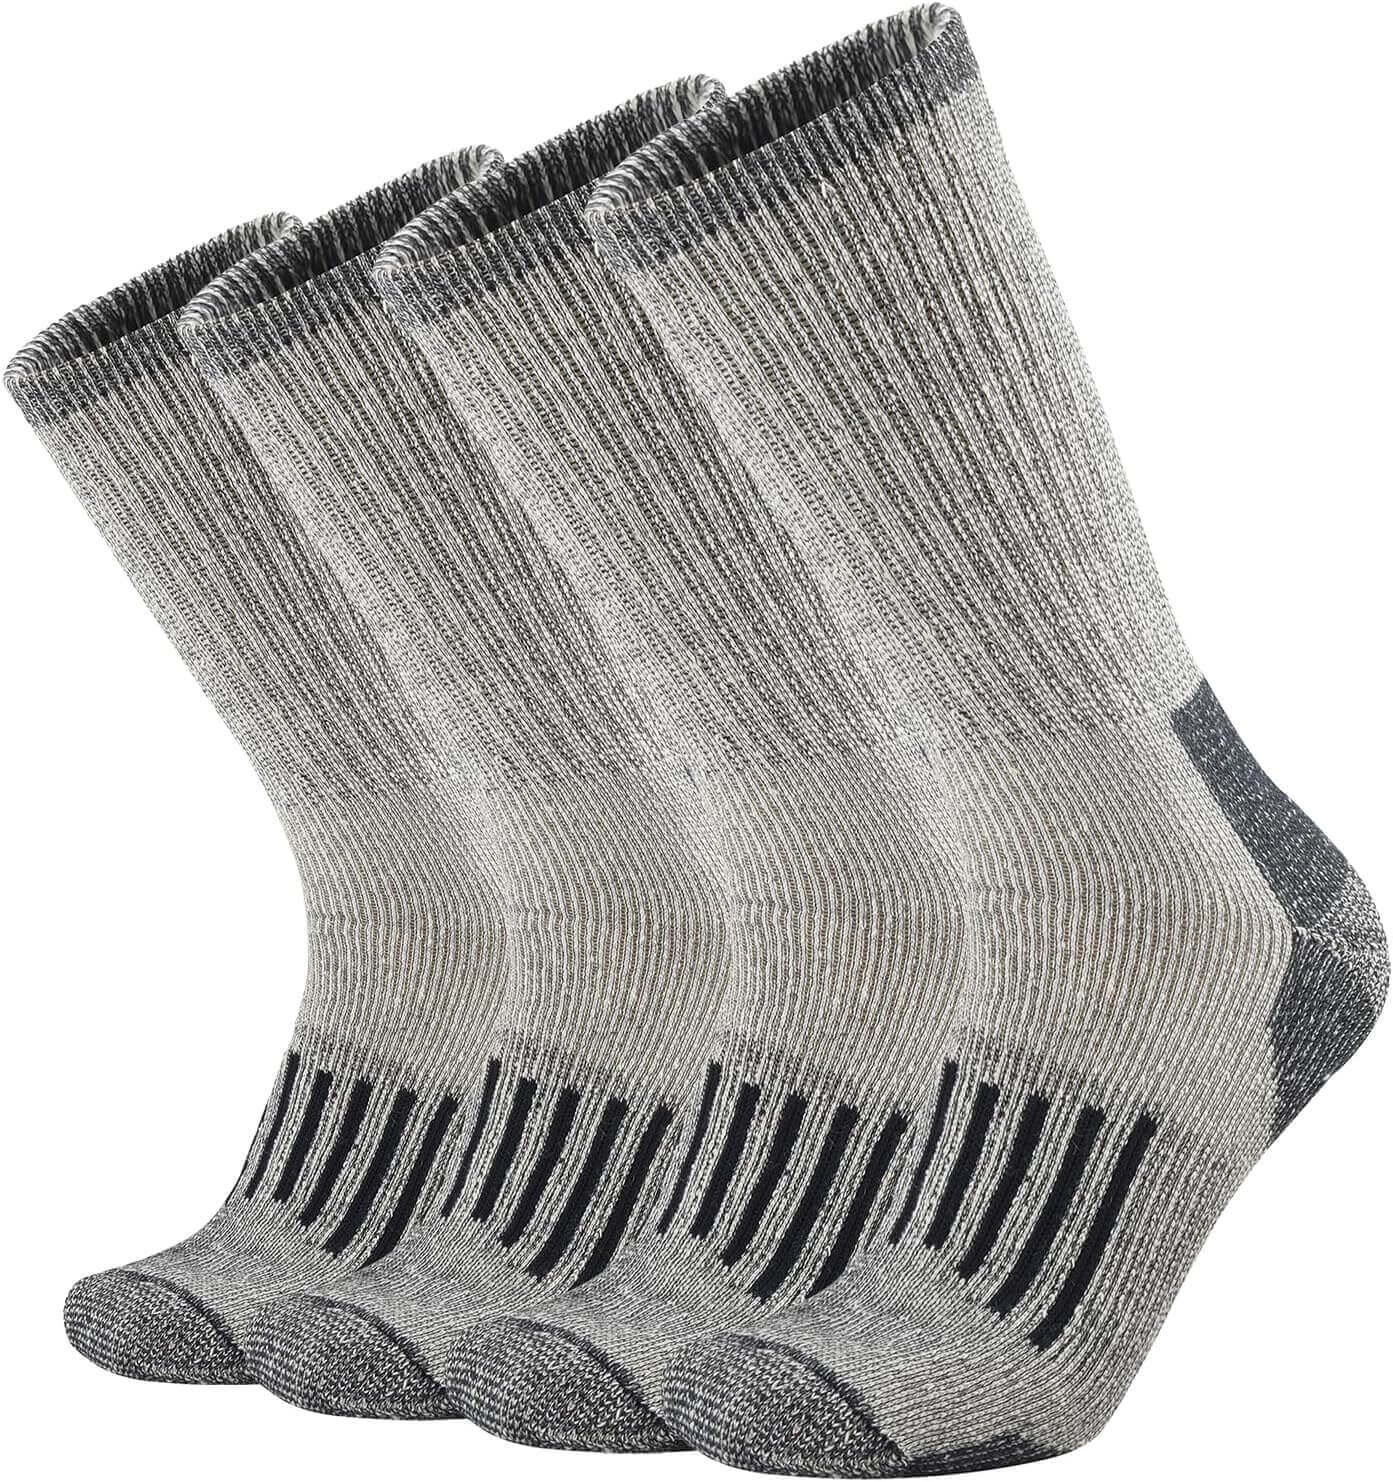 Shop The Latest >SOX TOWN Men's Merino Wool Cushion Crew Socks > *Only $34.99*> From The Top Brand > *Sox Townl* > Shop Now and Get Free Shipping On Orders Over $45.00 >*Shop Earth Foot*